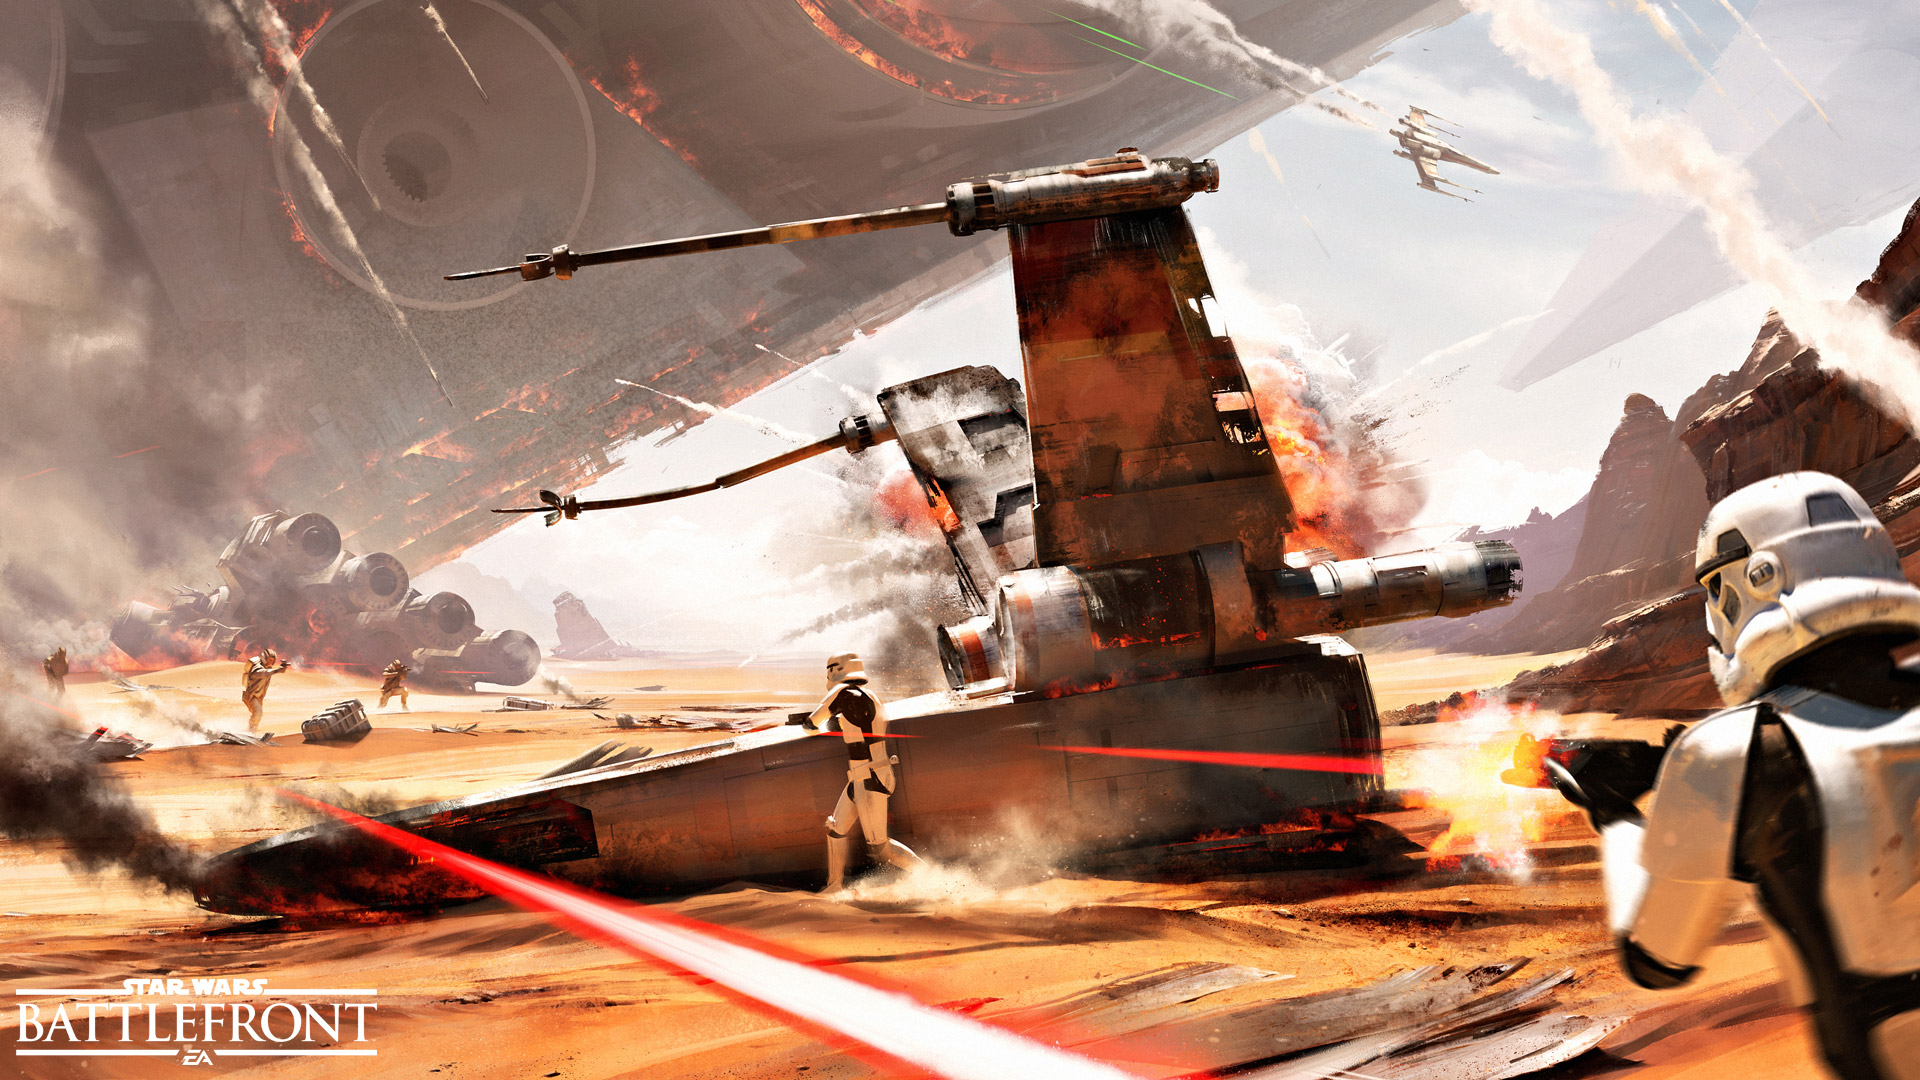 Star Wars Battlefront - New map and Game Mode on December 1st